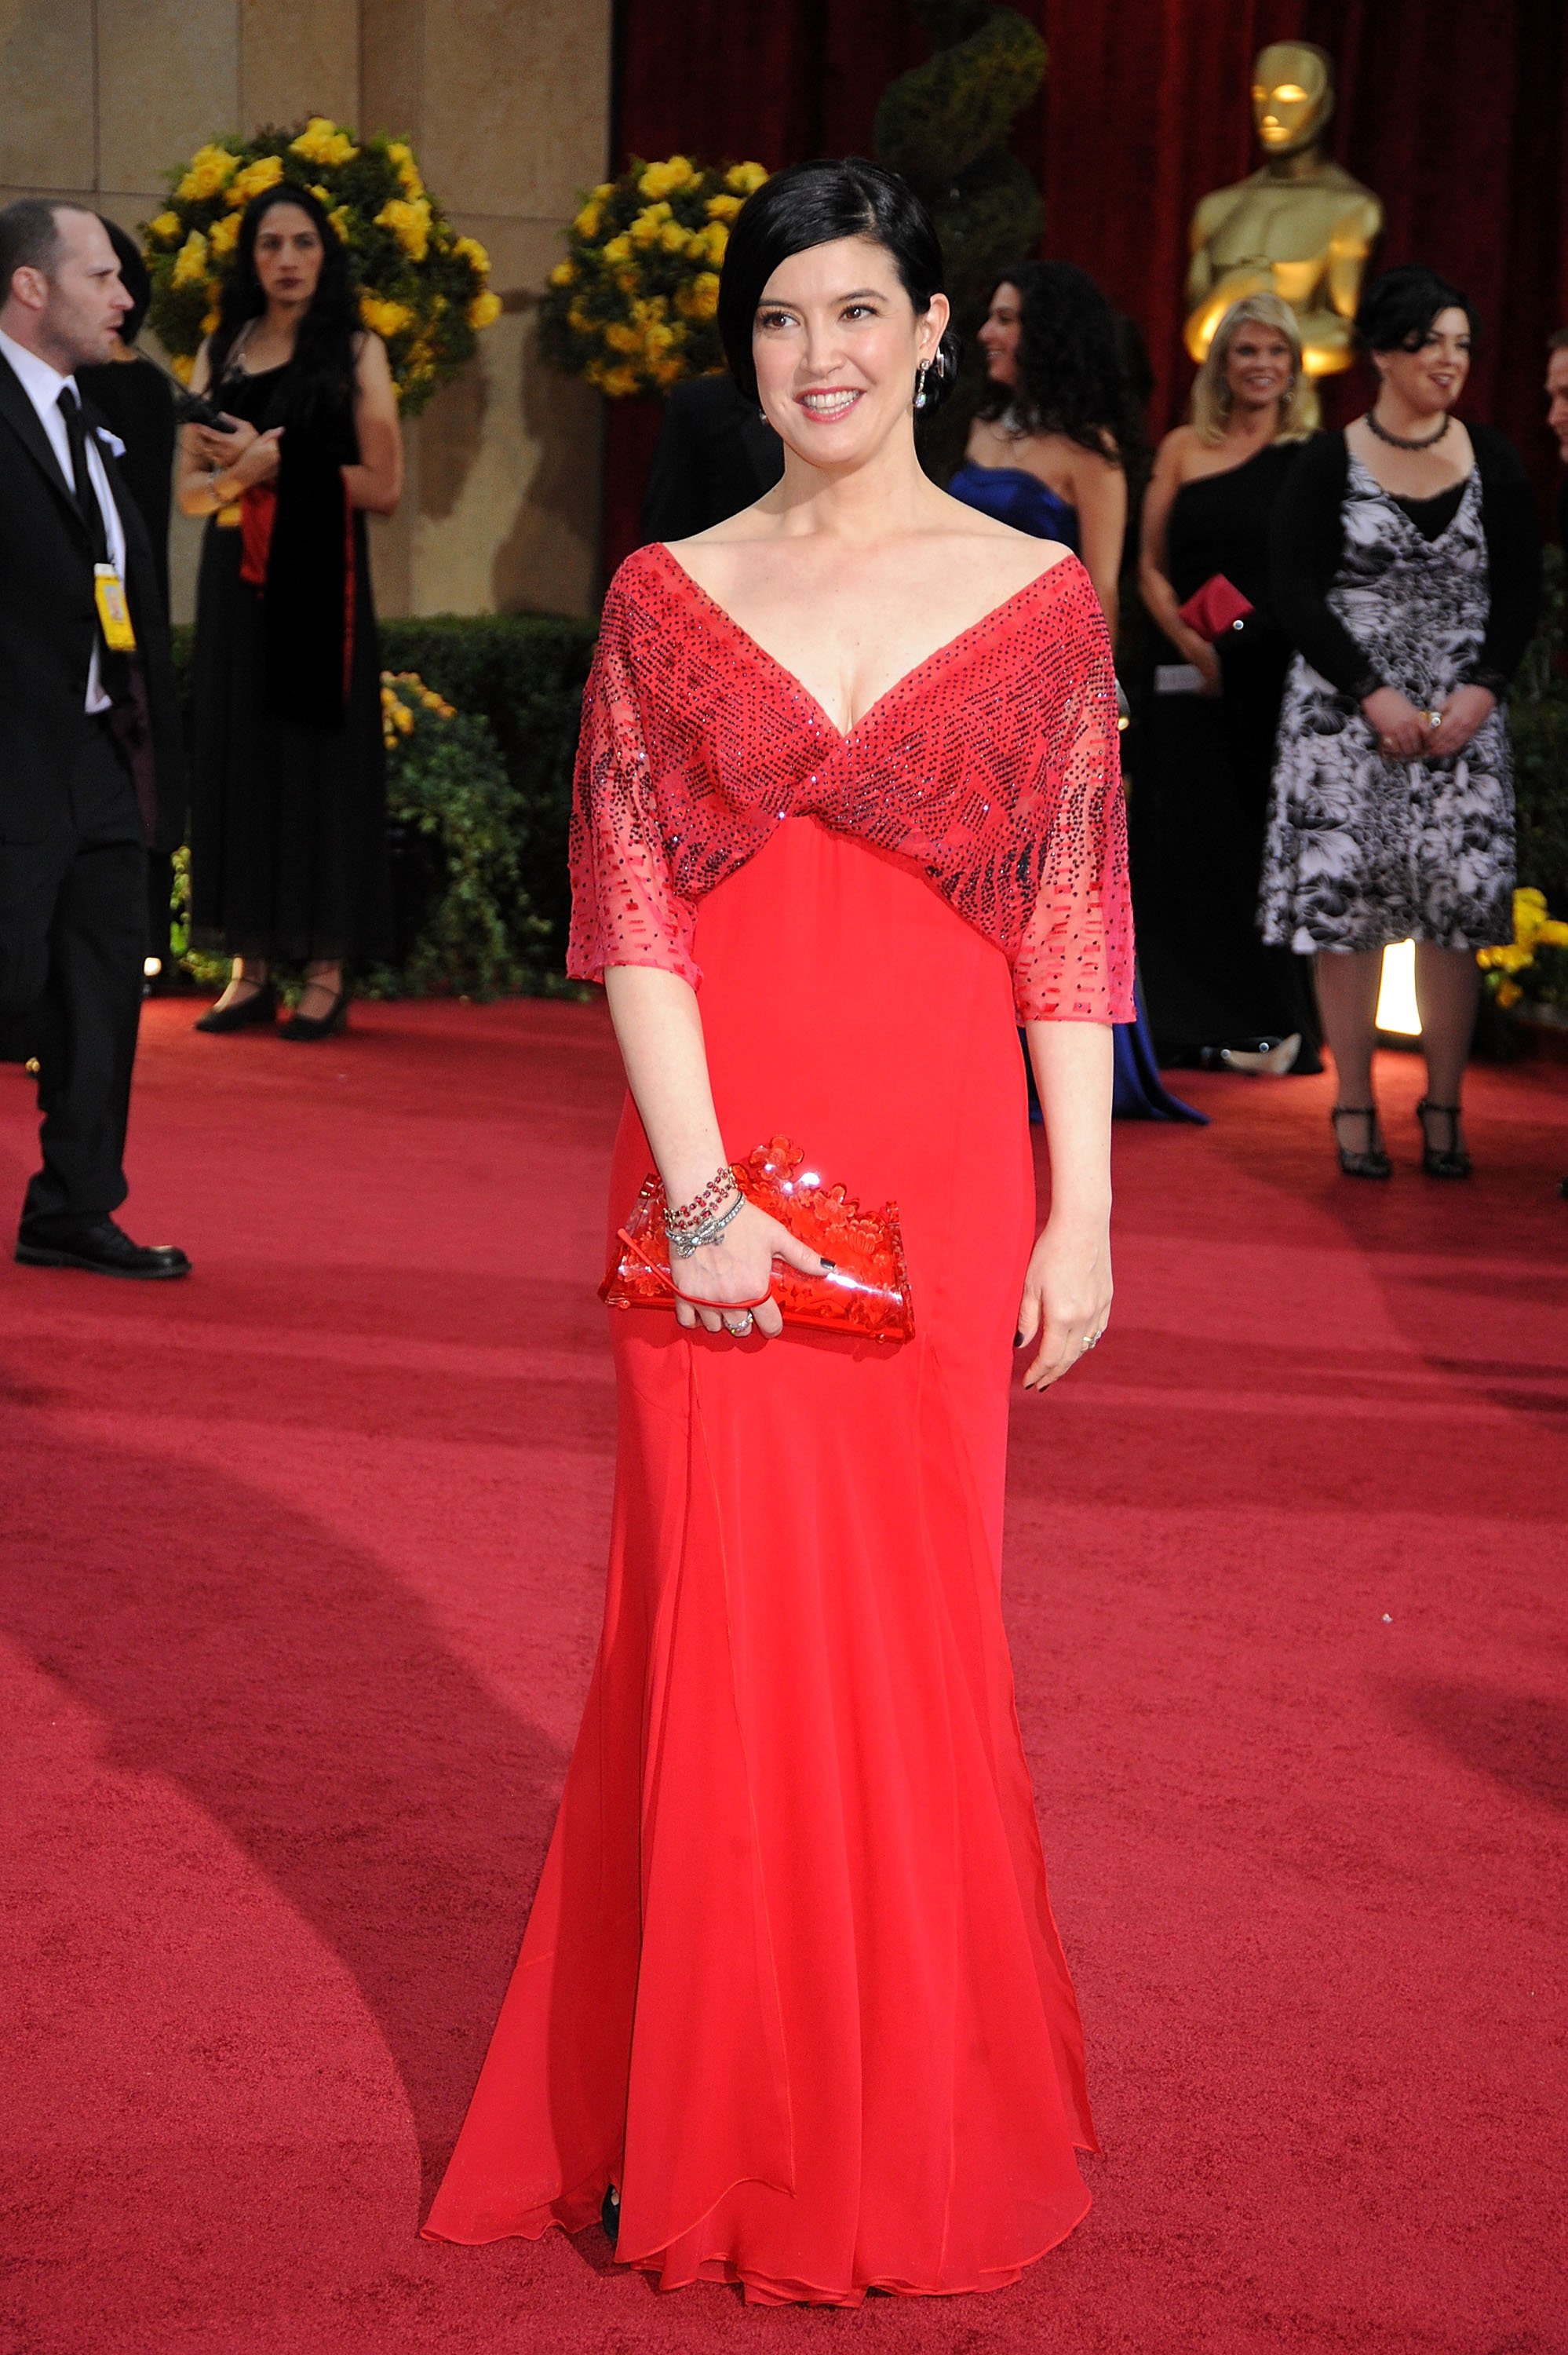 Phoebe Cates at the 81st Annual Academy Awards in California on February 22, 2009 | Source: Getty Images 